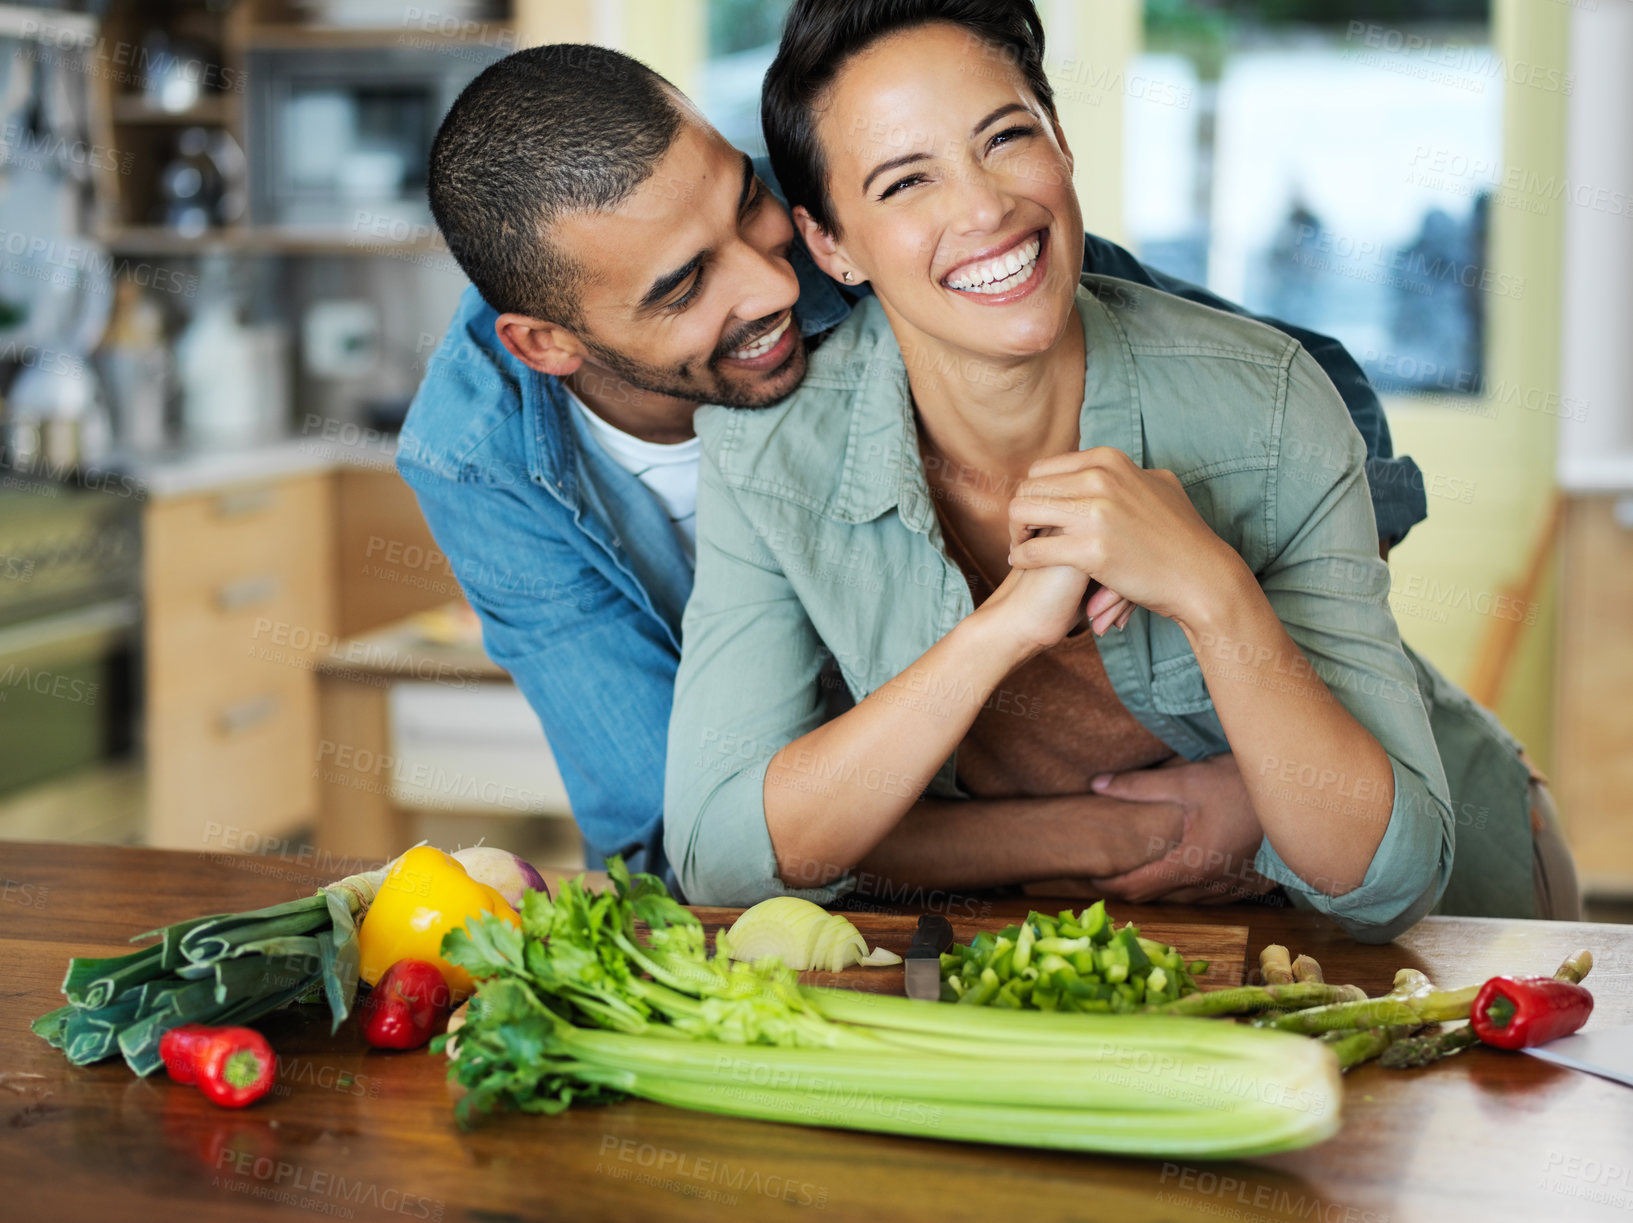 Buy stock photo Portrait of an affectionate young couple preparing a meal together in their kitchen